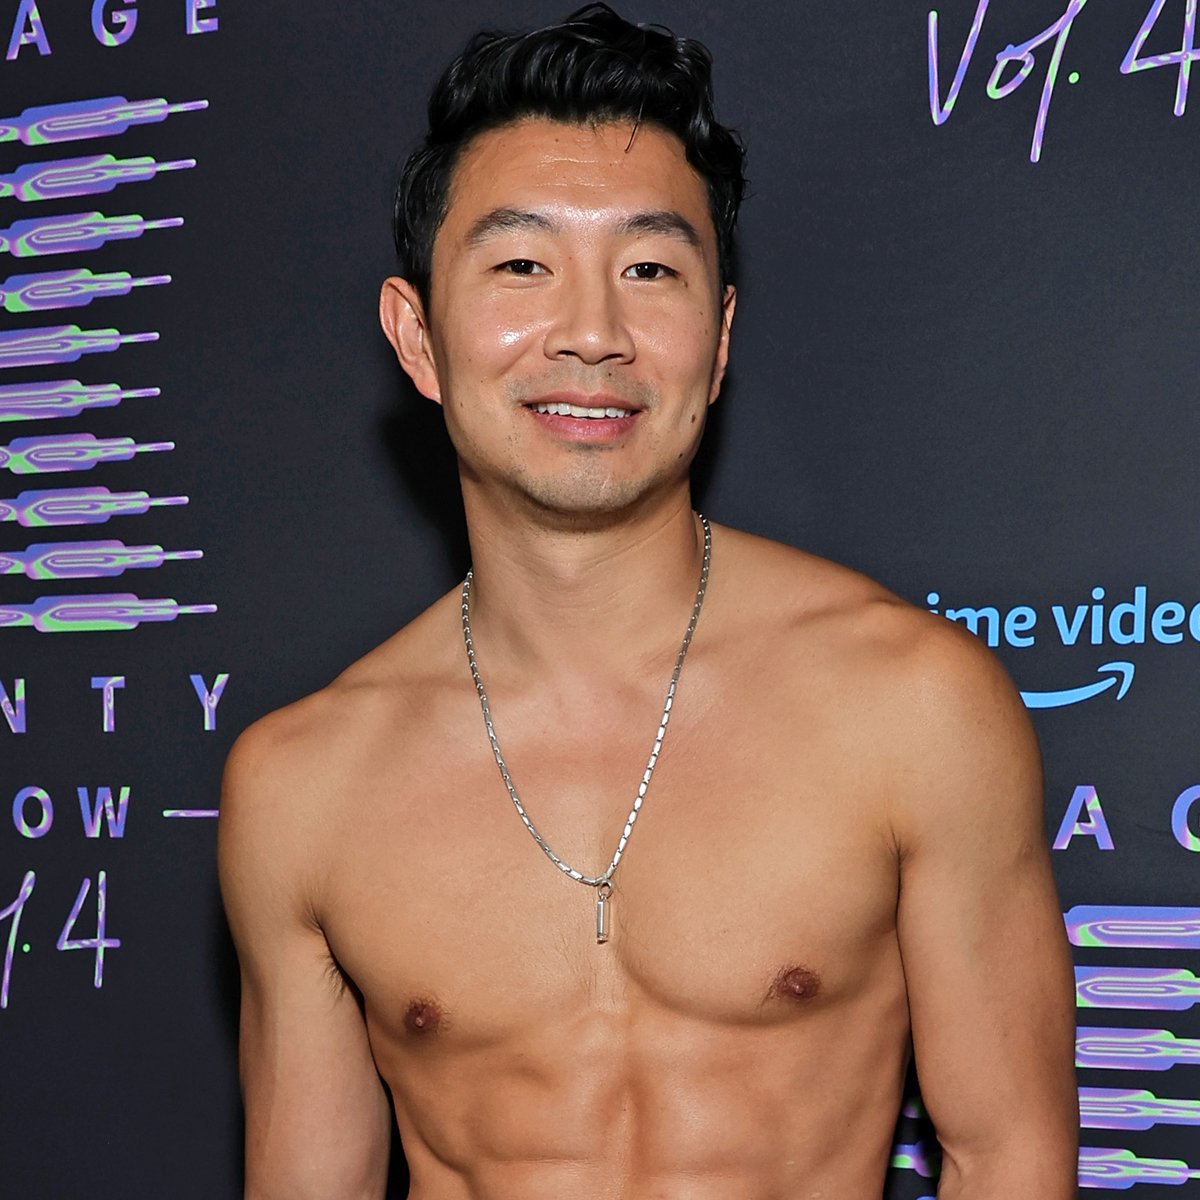 The Real-Life Diet of Simu Liu, Who Says He's “Relatively Undisciplined”